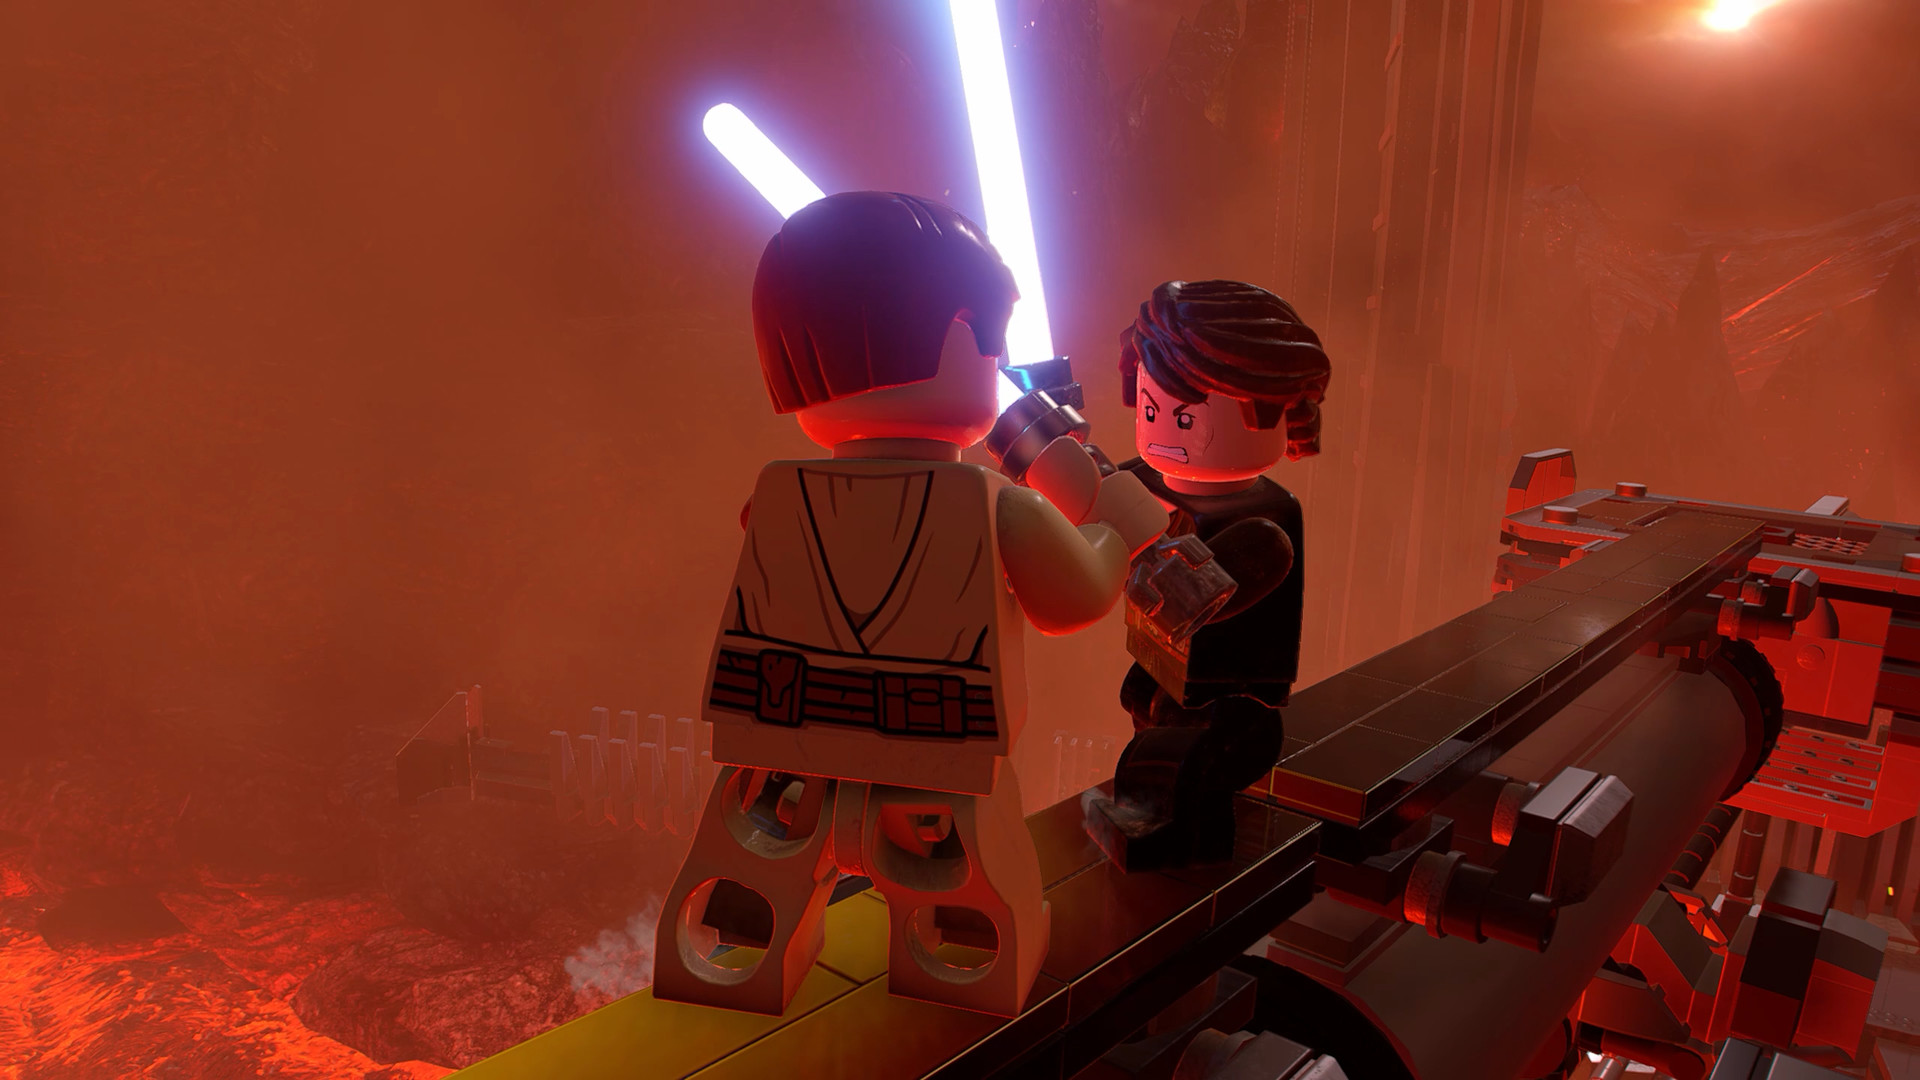 The new Lego Star Wars is the biggest Lego or Star Wars game on Steam